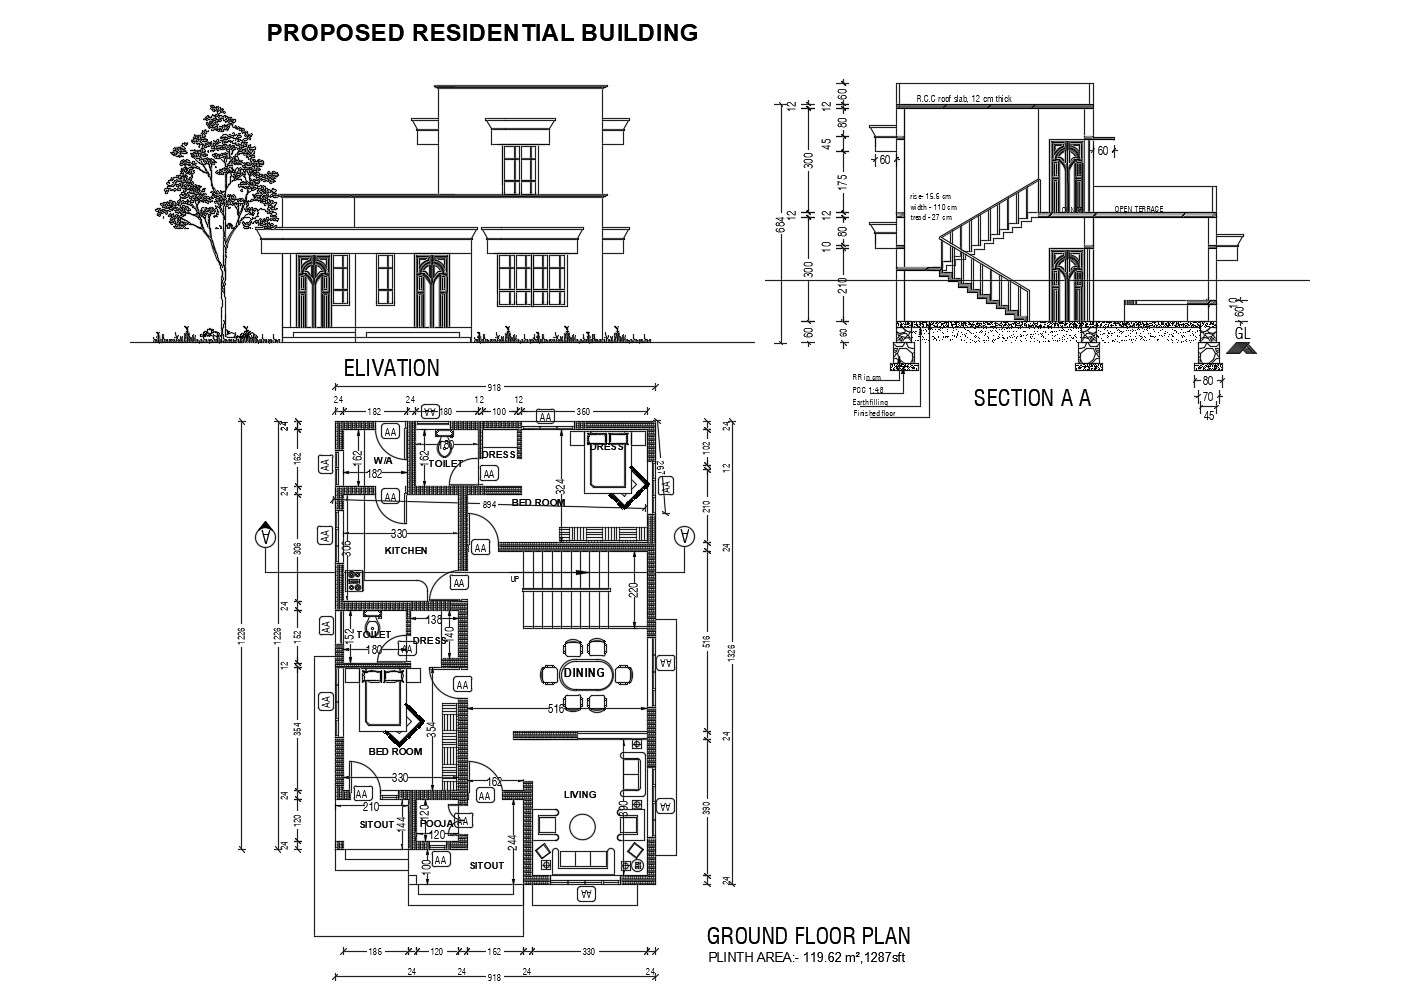 Floor plan of residential building with elevation in dwg file ...